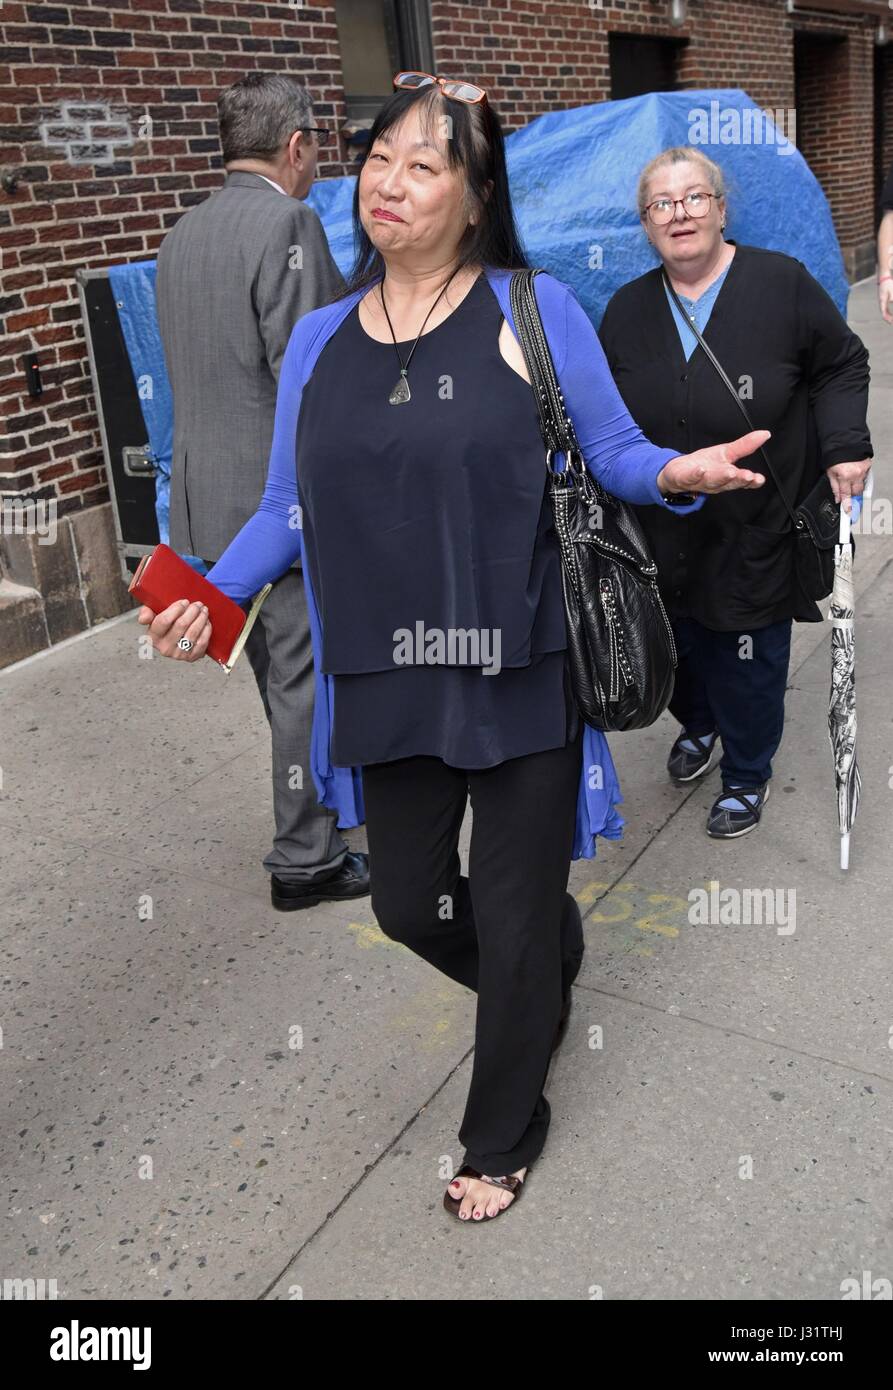 New York, NY, USA. 1st May, 2017. May Pang out and about for Celebrity Candids - MON, New York, NY May 1, 2017. Credit: Derek Storm/Everett Collection/Alamy Live News Stock Photo